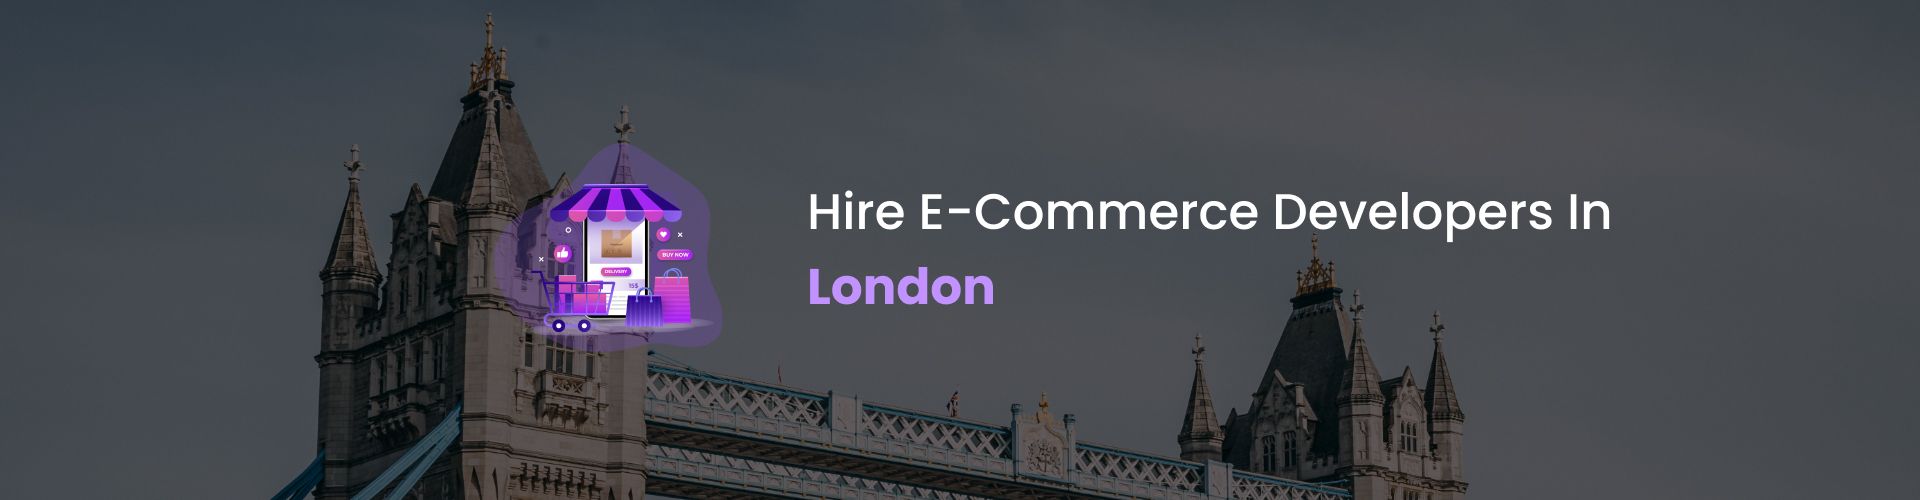 hire ecommerce developers in london